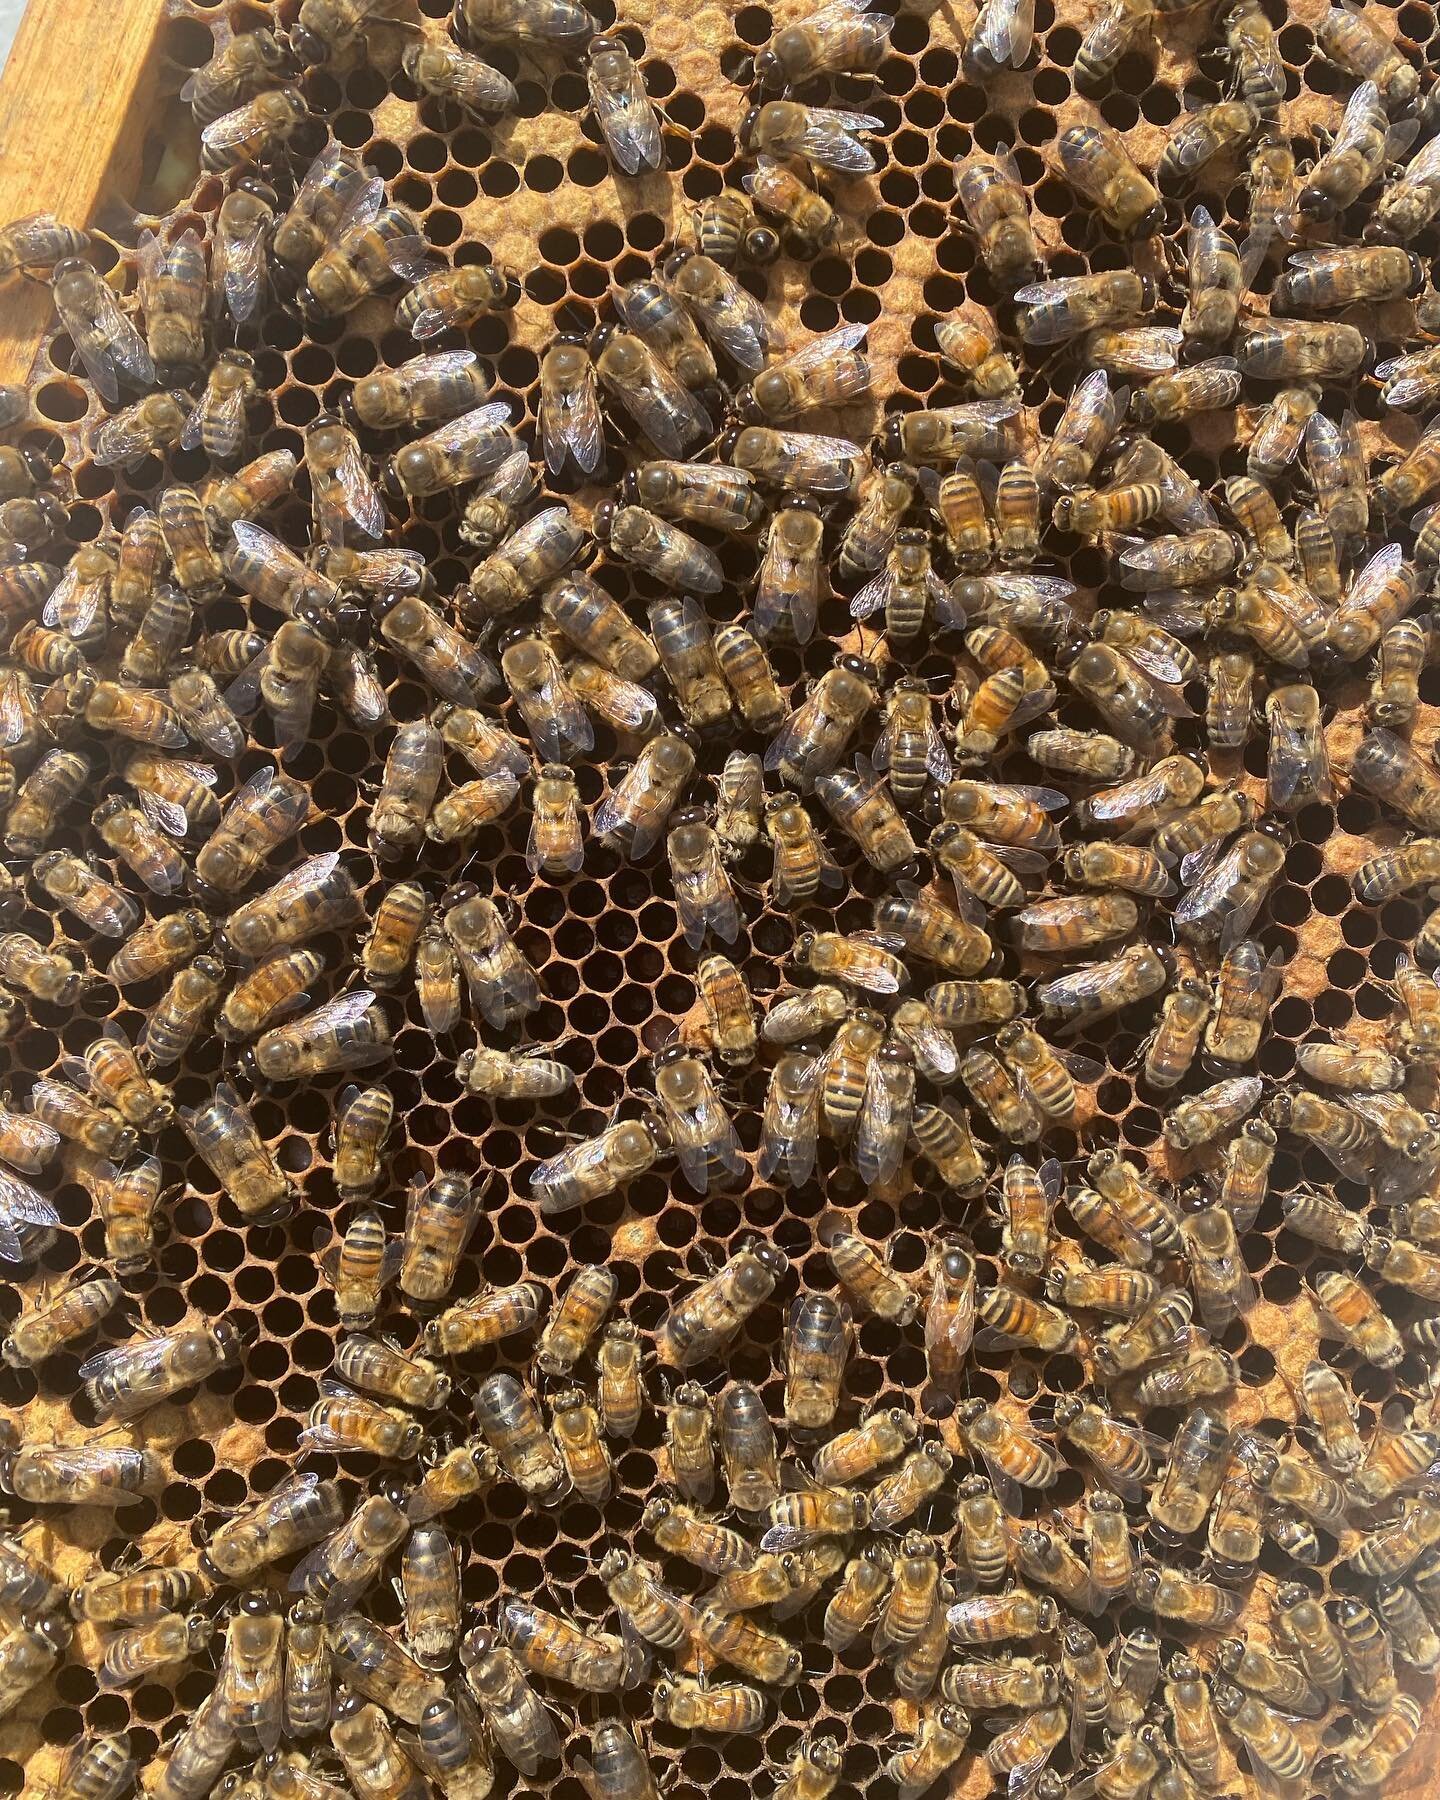 #Queenspotting among #drones 
.
.
.
Leave me a 👑 if you find her!
.
.
This beautiful hive lives at @hotelparadox and is juicy and beautiful 
.
.
#bees #beekeeping #queenbee #royal #retinue it&rsquo;s like @_wheres.waldo_._ over here!